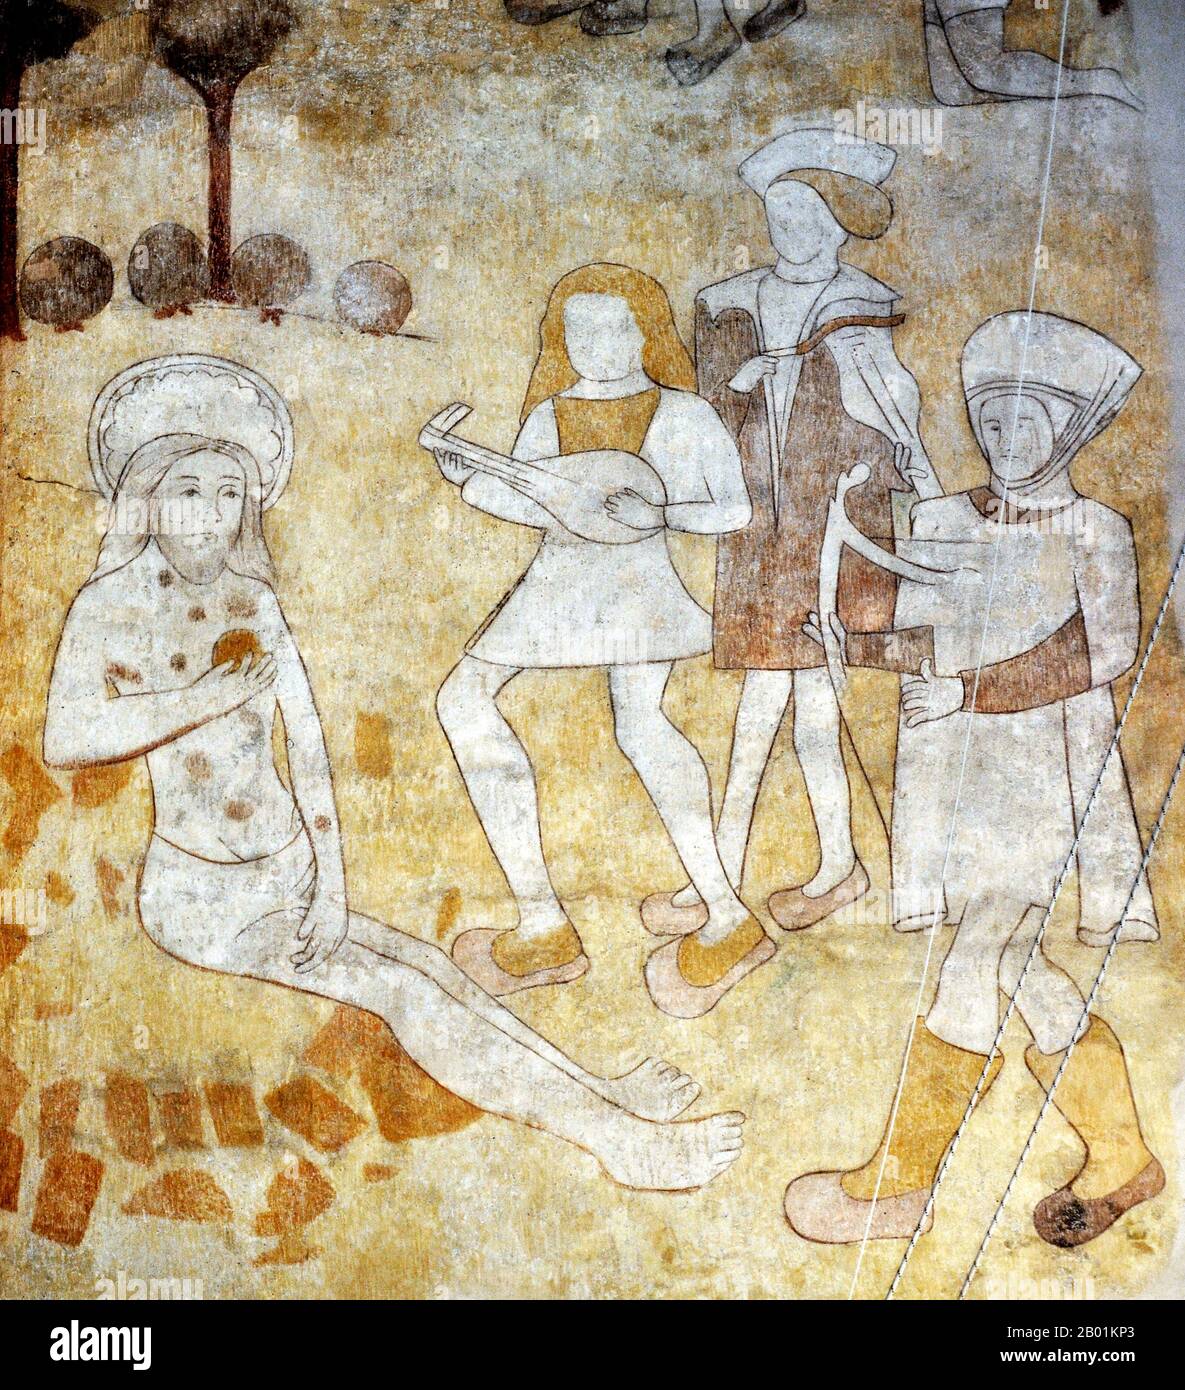 Netherlands: Job (left, with sores) in a medieval wall painting at Hattem Church, Gelderland, c. 13th century.  Job is the central character of the Book of Job in the Hebrew Bible. Job is also recognised as a prophet of God in the Qur'an.  The Book of Job begins with an introduction to Job's character. He is described as a blessed man who lives righteously. God's praise of Job prompts Satan to challenge Job's integrity and suggesting that Job serves God simply because he protects him. God removes Job's protection, allowing Satan to take his wealth, his children and his physical health. Stock Photo